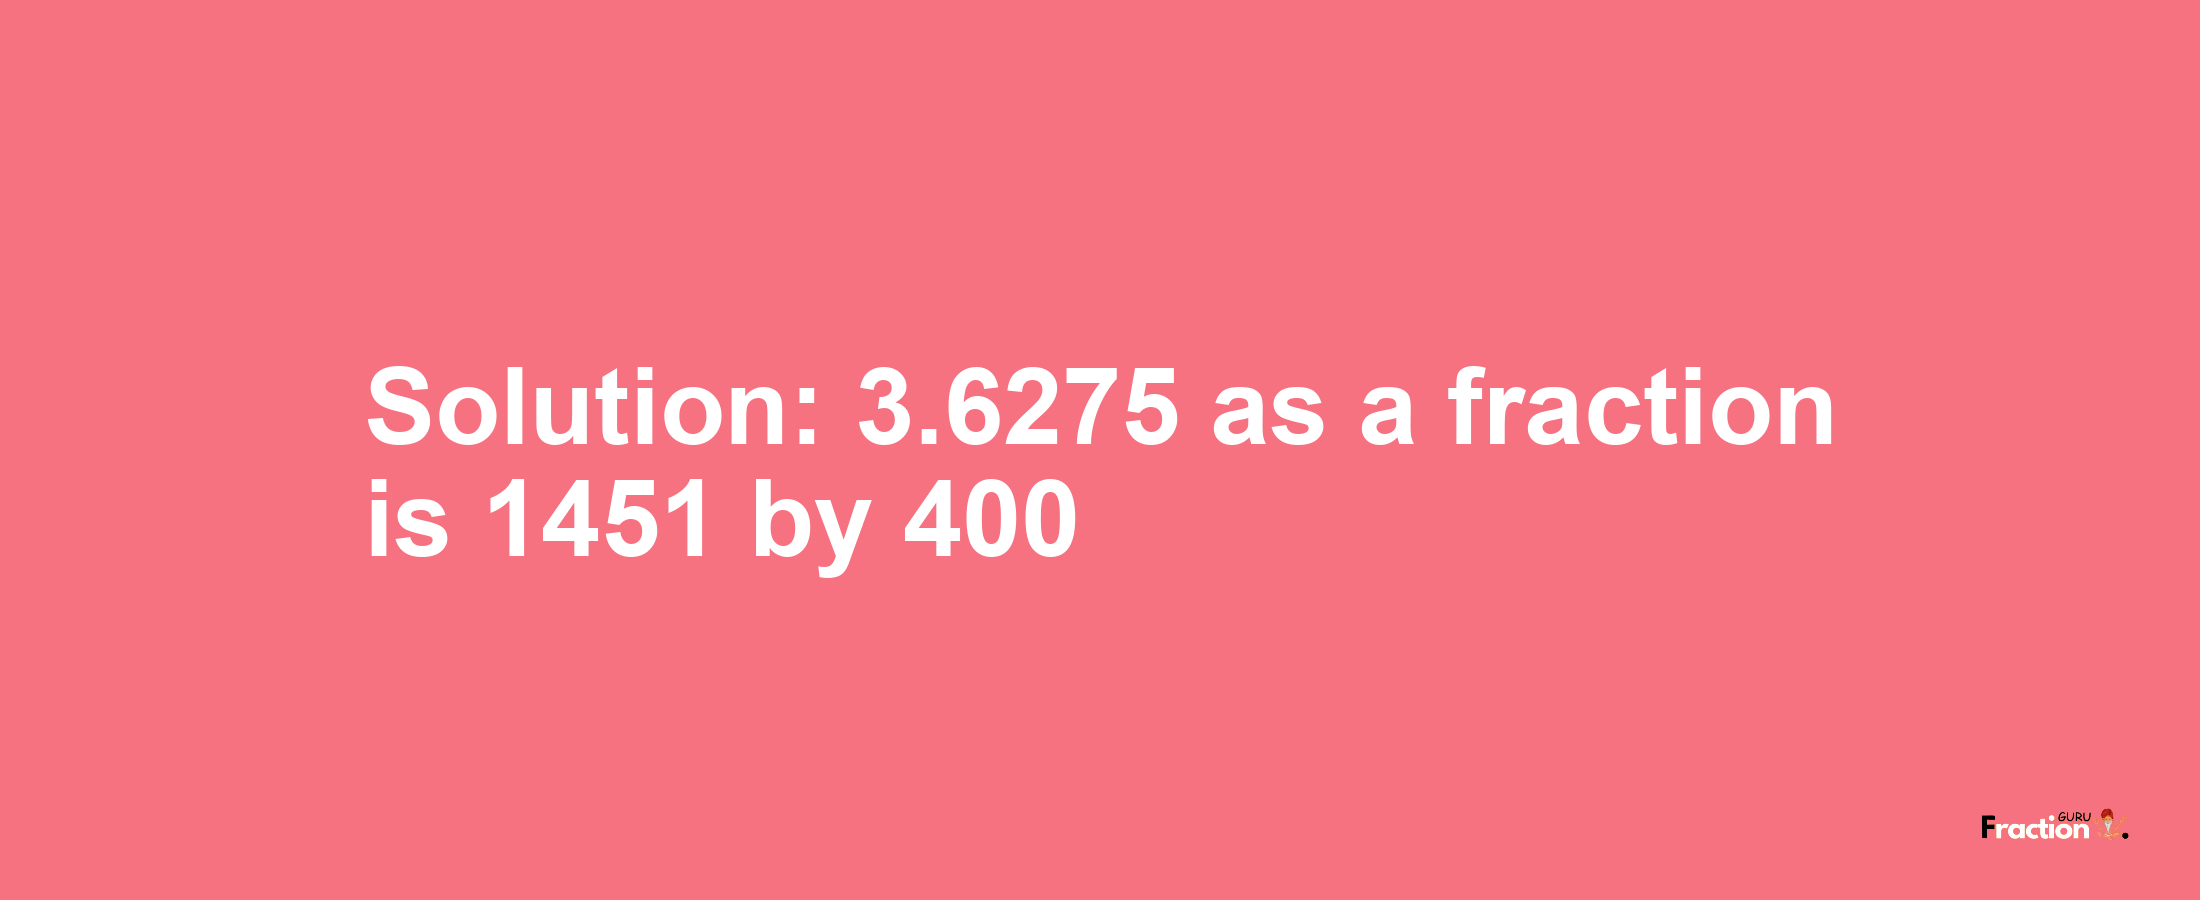 Solution:3.6275 as a fraction is 1451/400